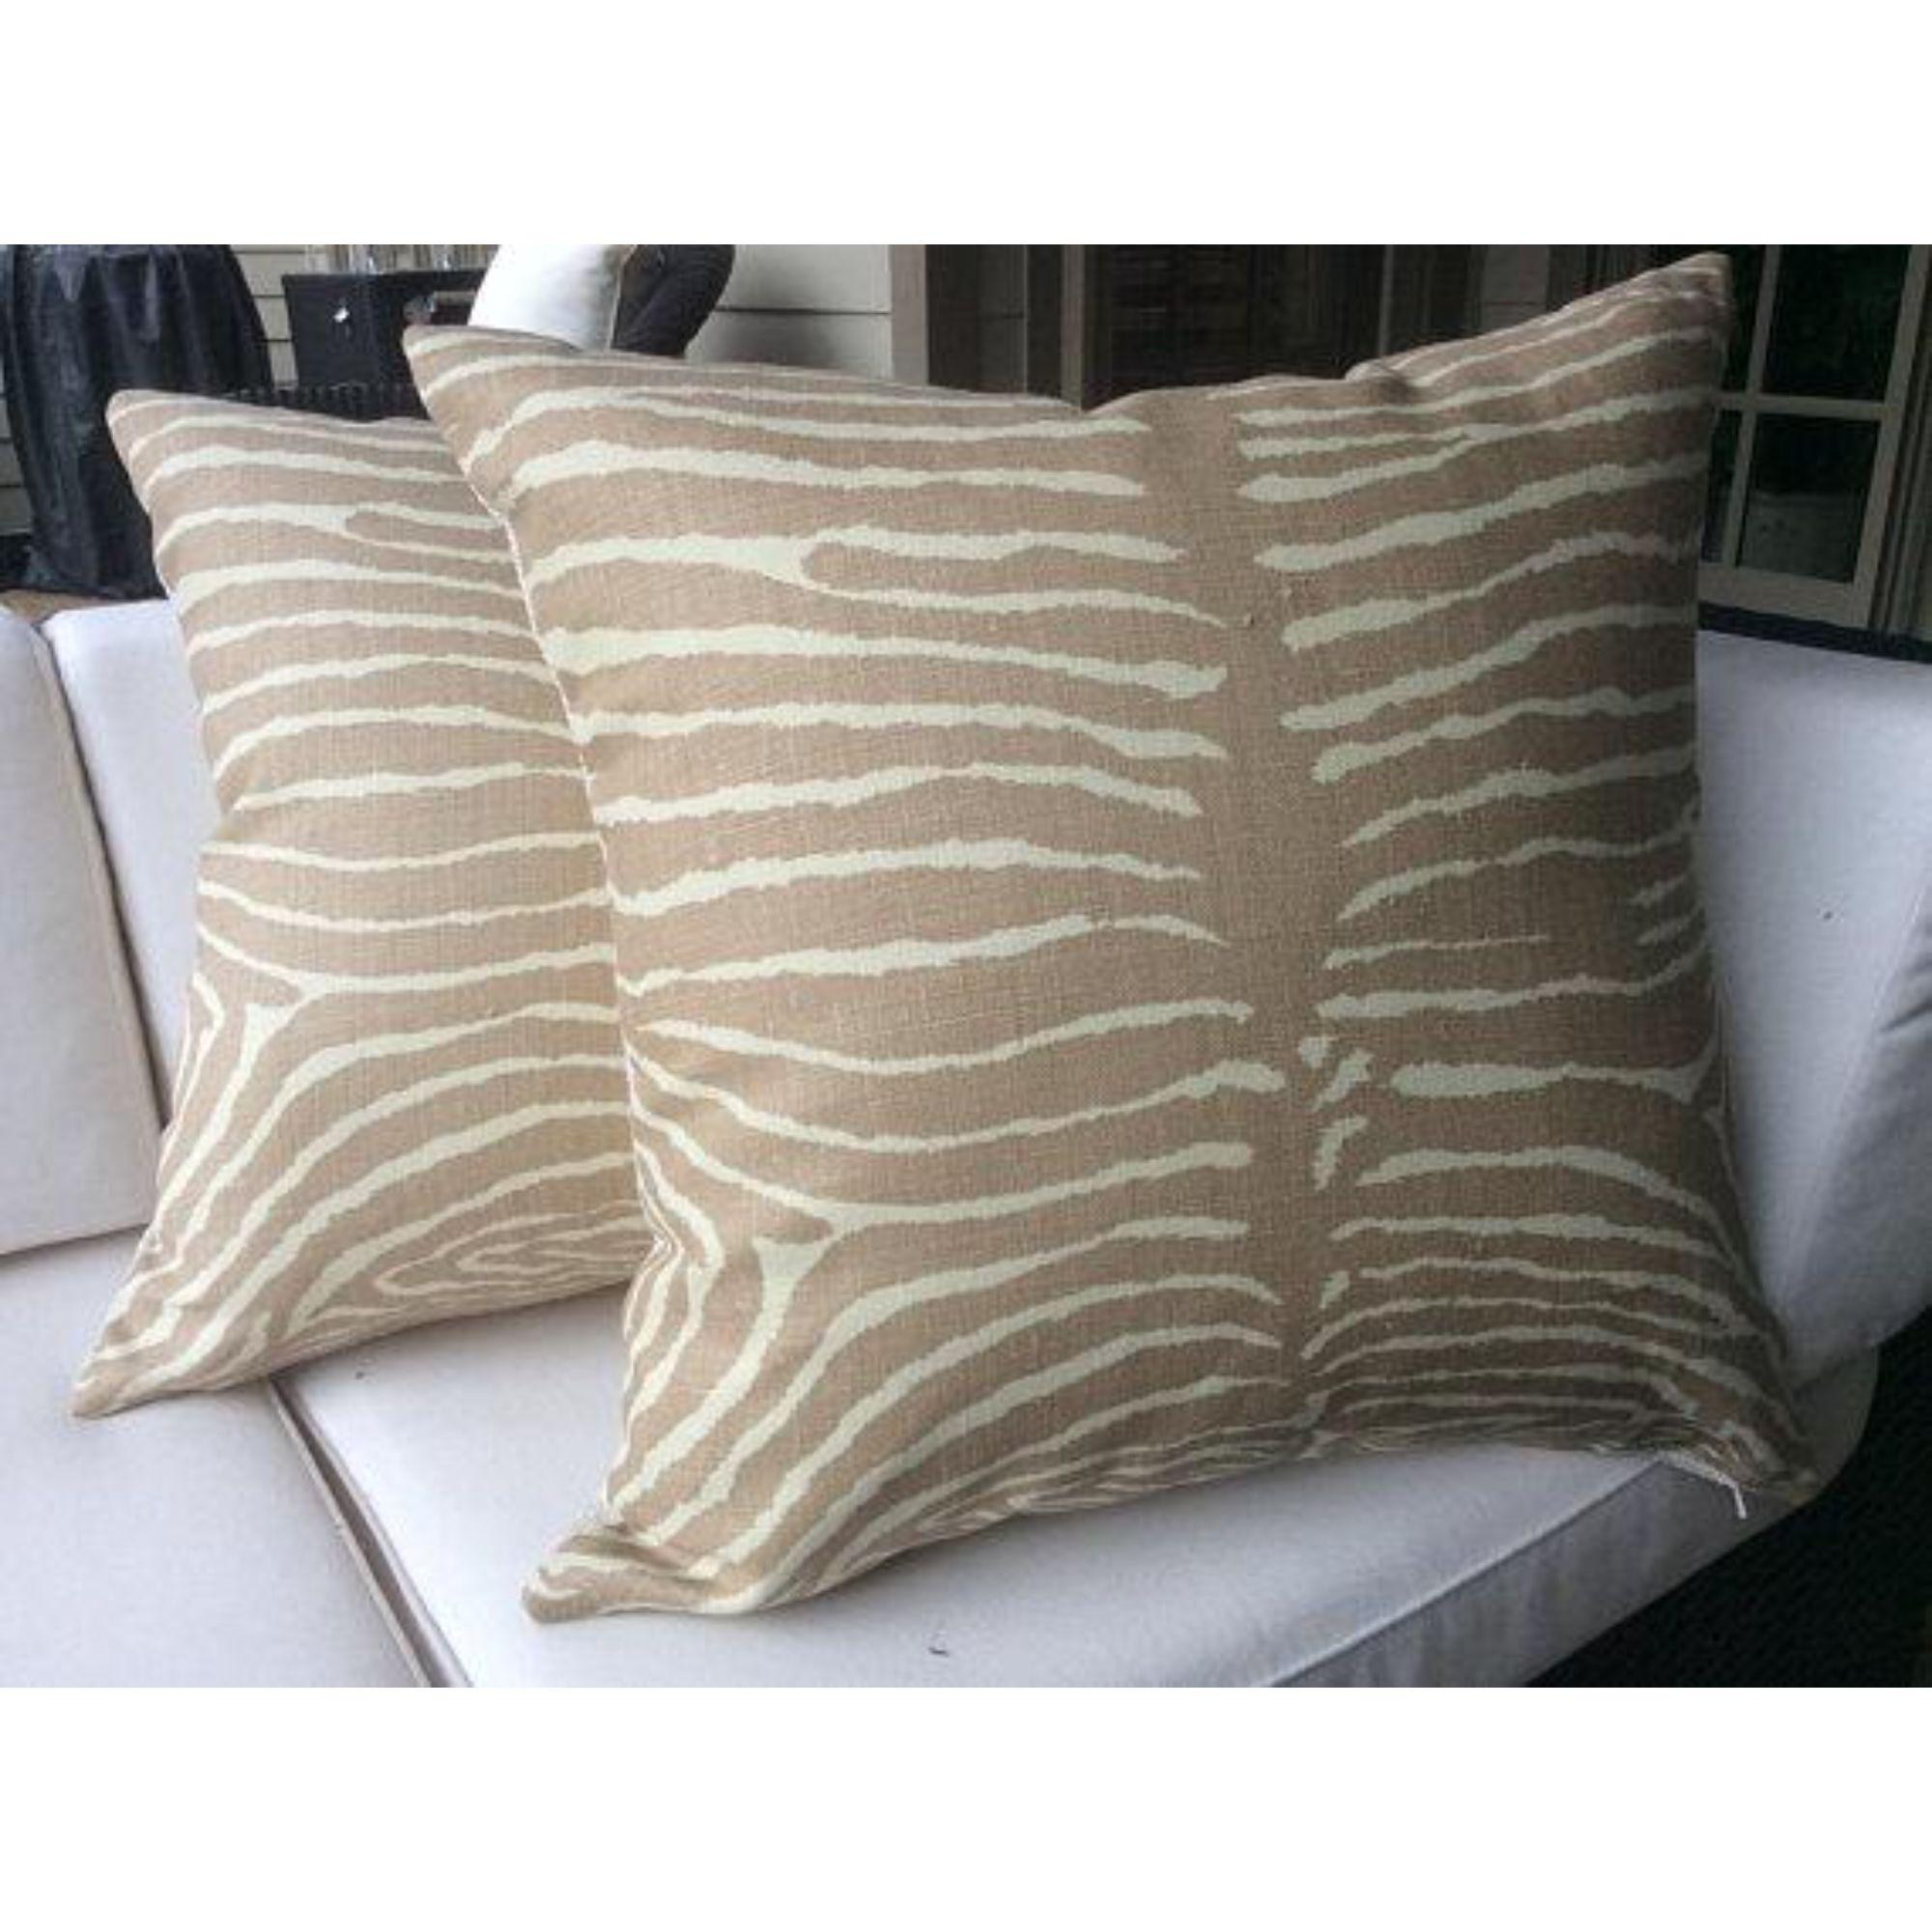 Contemporary Brunschwig and Fils “Pewter” Le Zebre Tan Pillows - a Pair For Sale